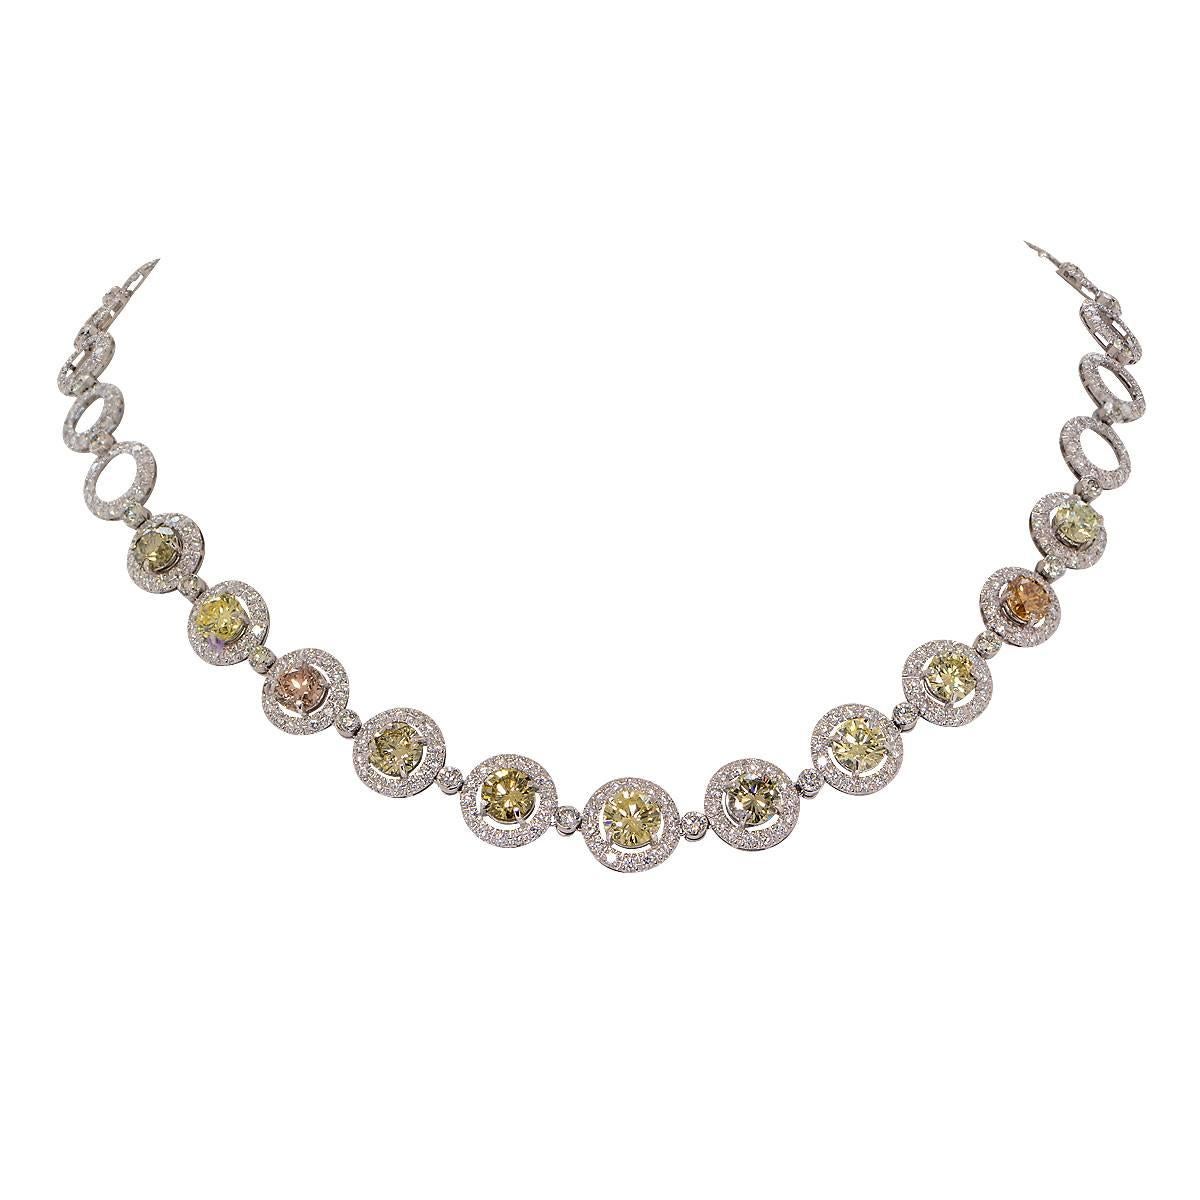 Magnificent platinum necklace composed of 4 GIA graded natural fancy yellow and brown round brilliant cut diamonds weighing 4.77cts with 7 round brilliant cut natural fancy brown and yellow diamonds weighing 7.87cts surrounded with 13.39cts of white